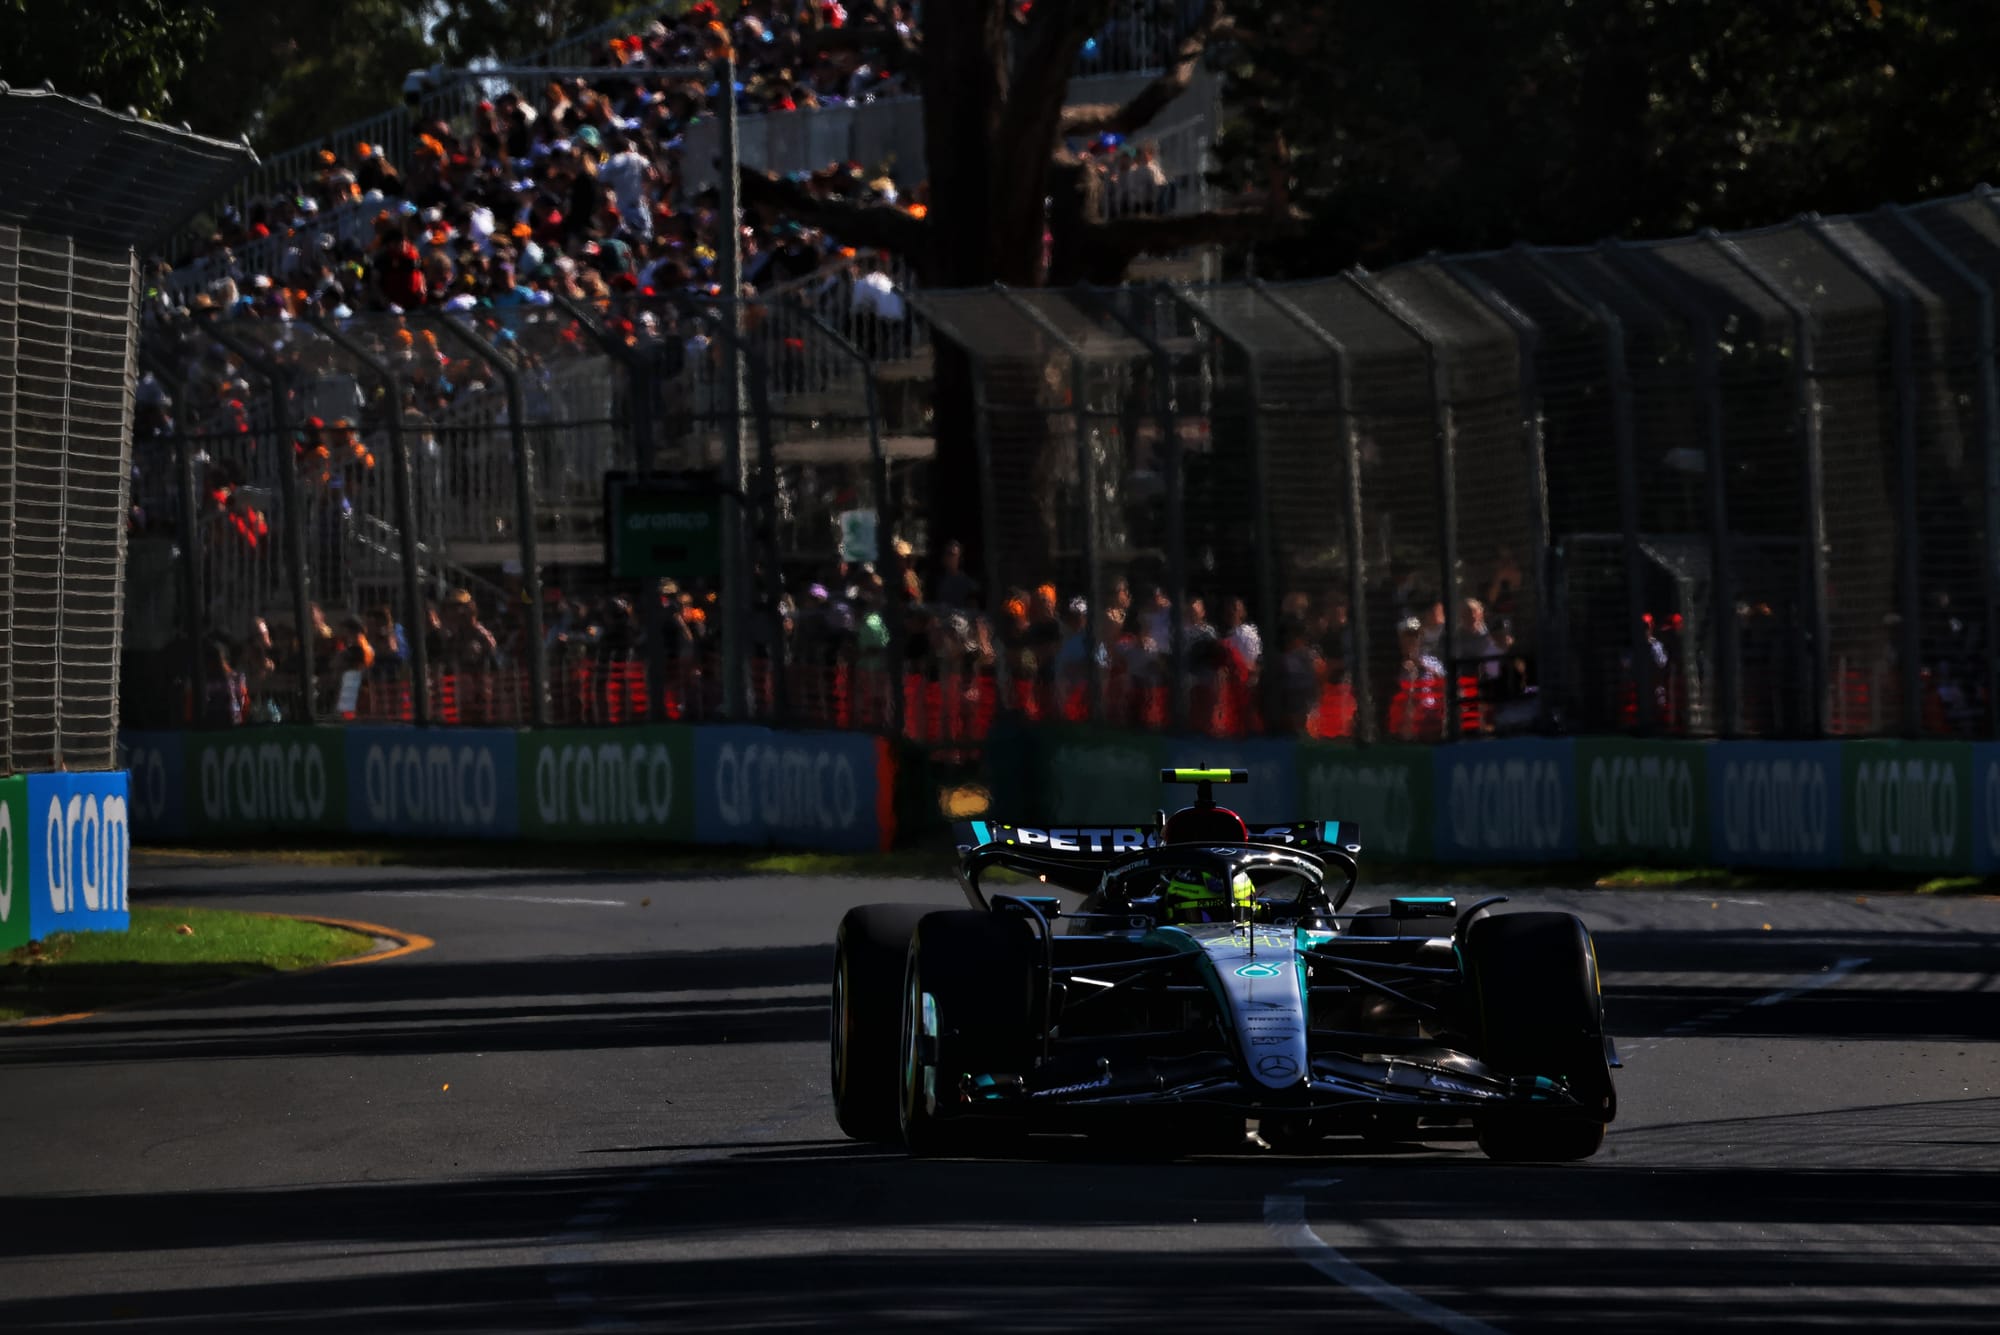 The fascinating qualifying fight Australian GP FP3 has teased